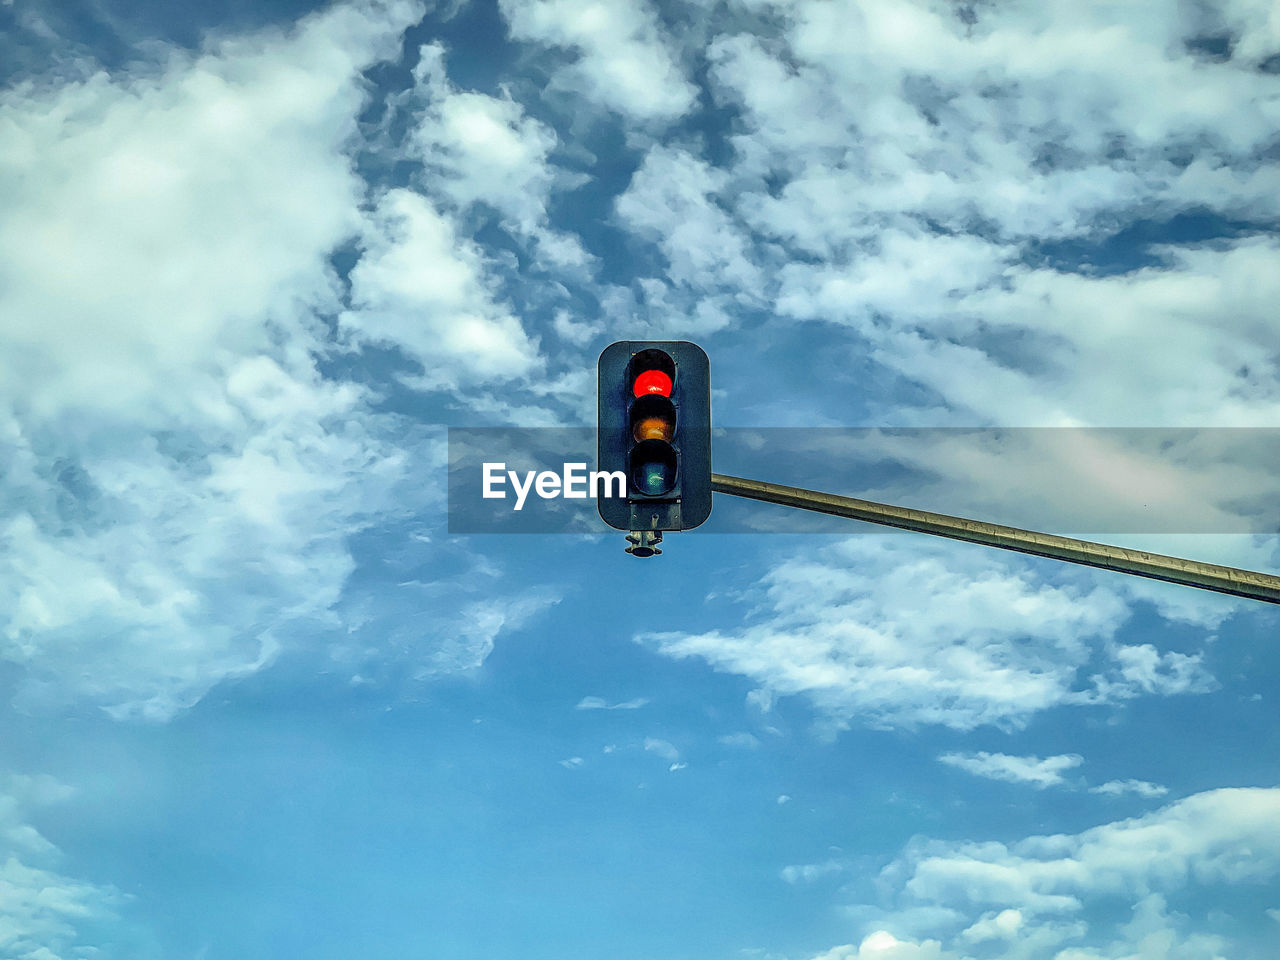 Low angle view of road signal against blue sky with swirling white clouds and copy space.